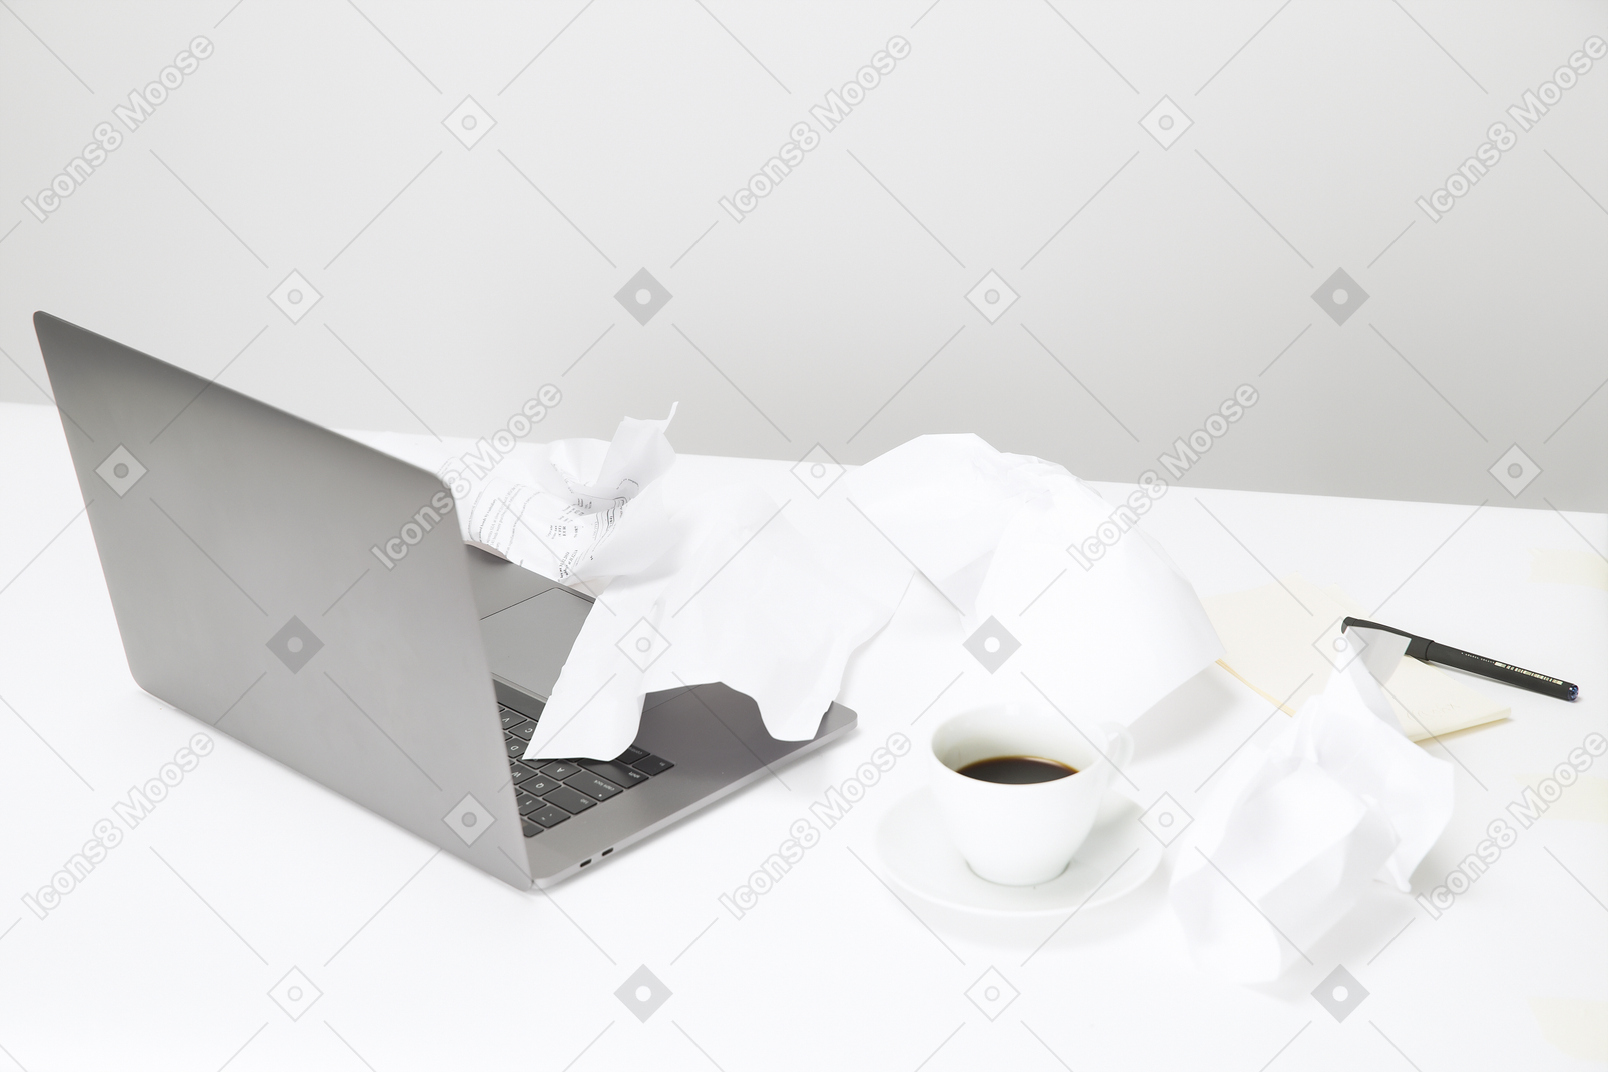 Crunched paper, cup of coffee and macbook